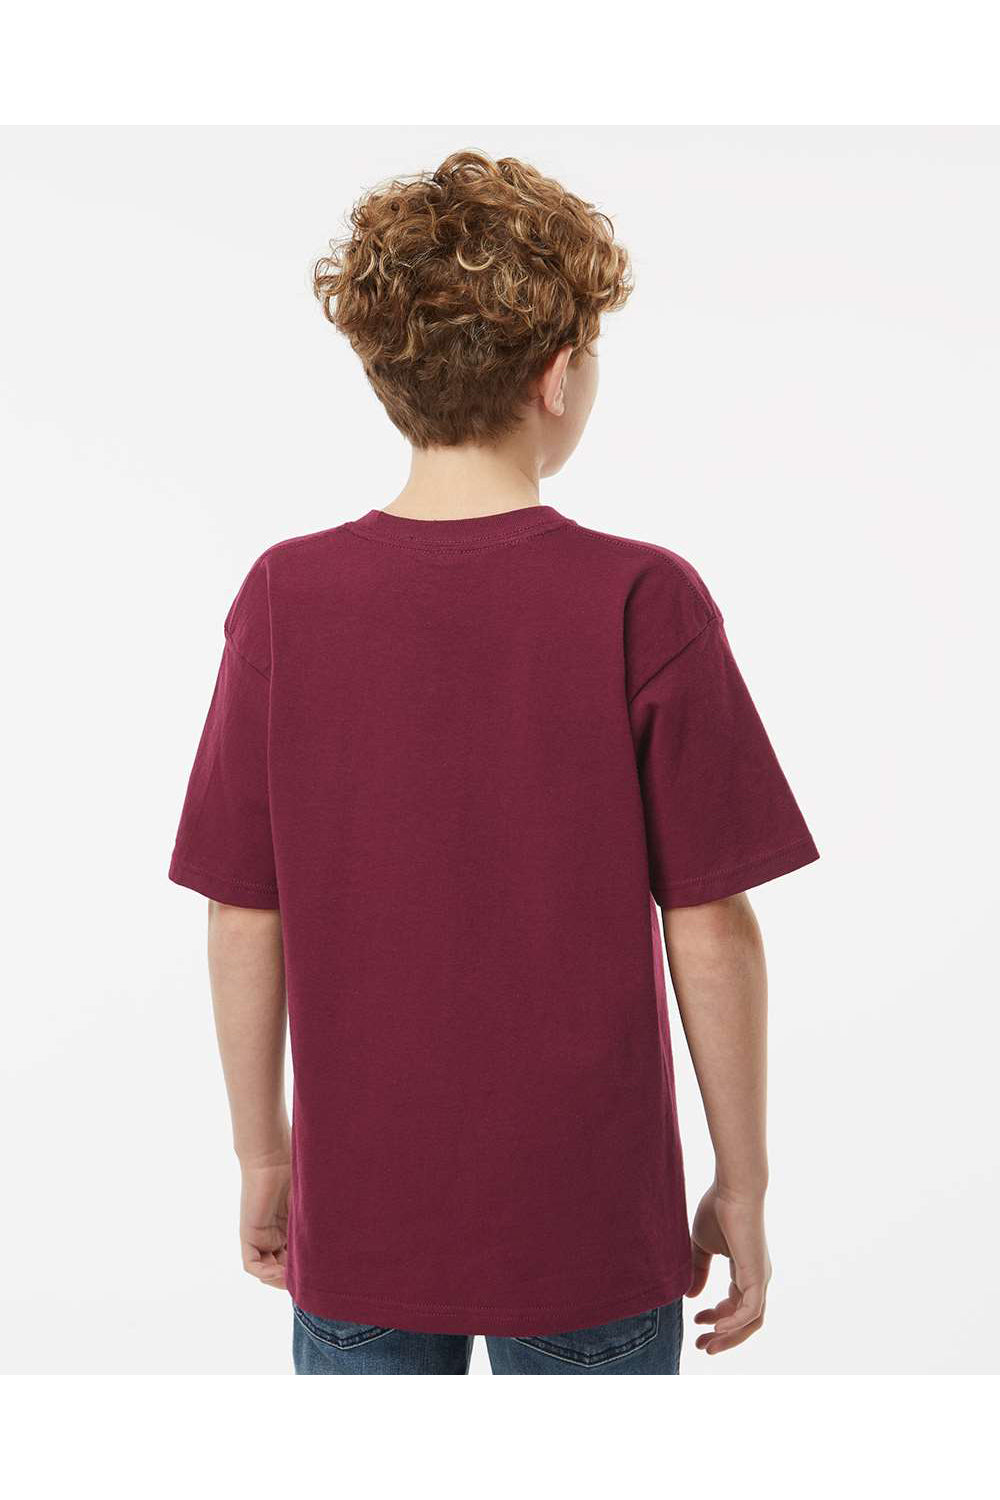 M&O 4850 Youth Gold Soft Touch Short Sleeve Crewneck T-Shirt Maroon Model Back